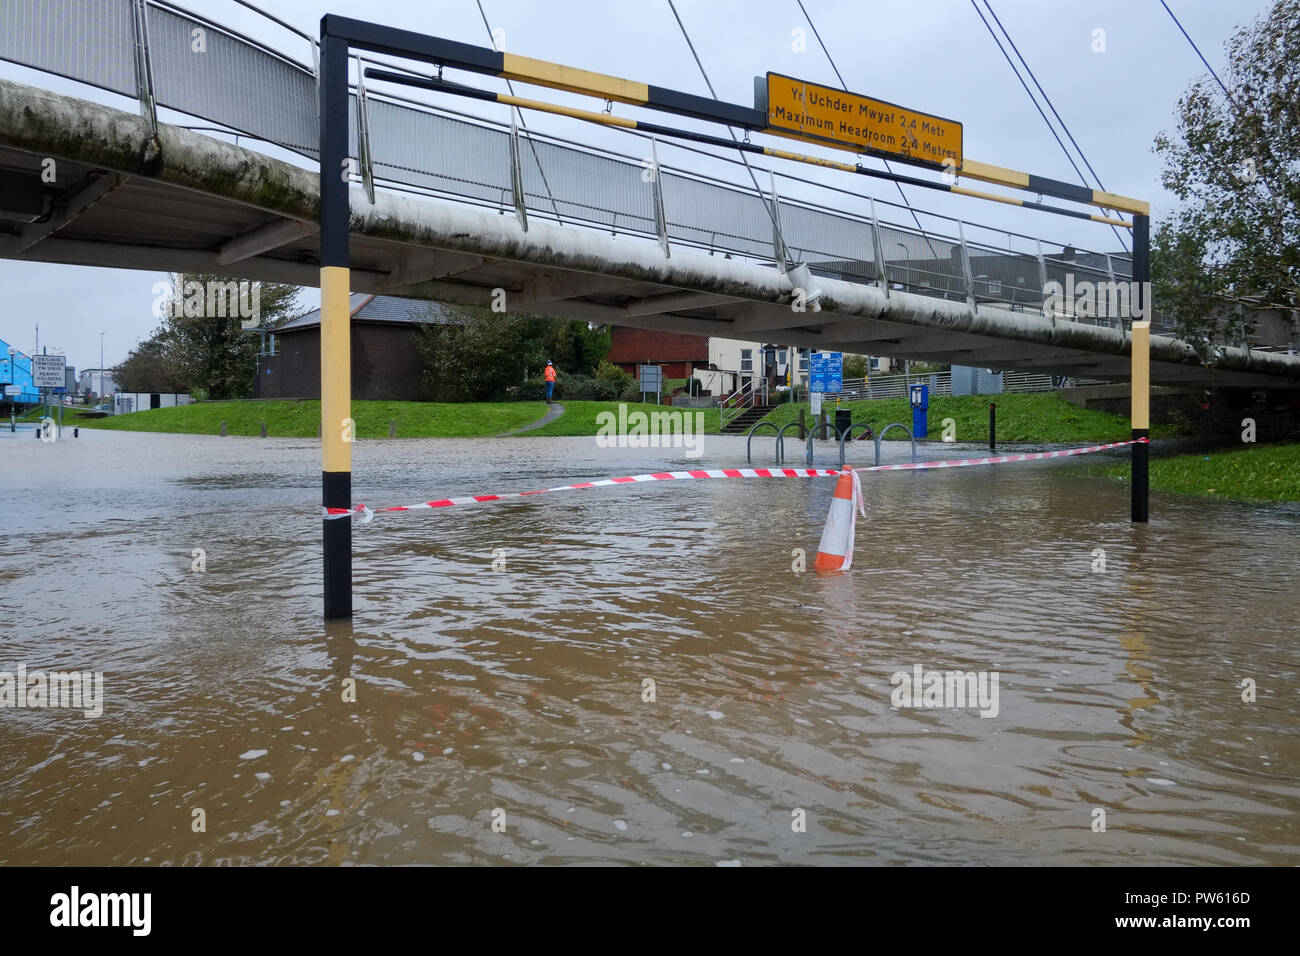 Carmarthen, Wales, UK. 13th October, 2018. UK weather. The combination of high tide with heavy rain and high winds by Storm Callum causes the river Towy to flood low lying areas. Credit: Algis Motuza/Alamy Live News Stock Photo